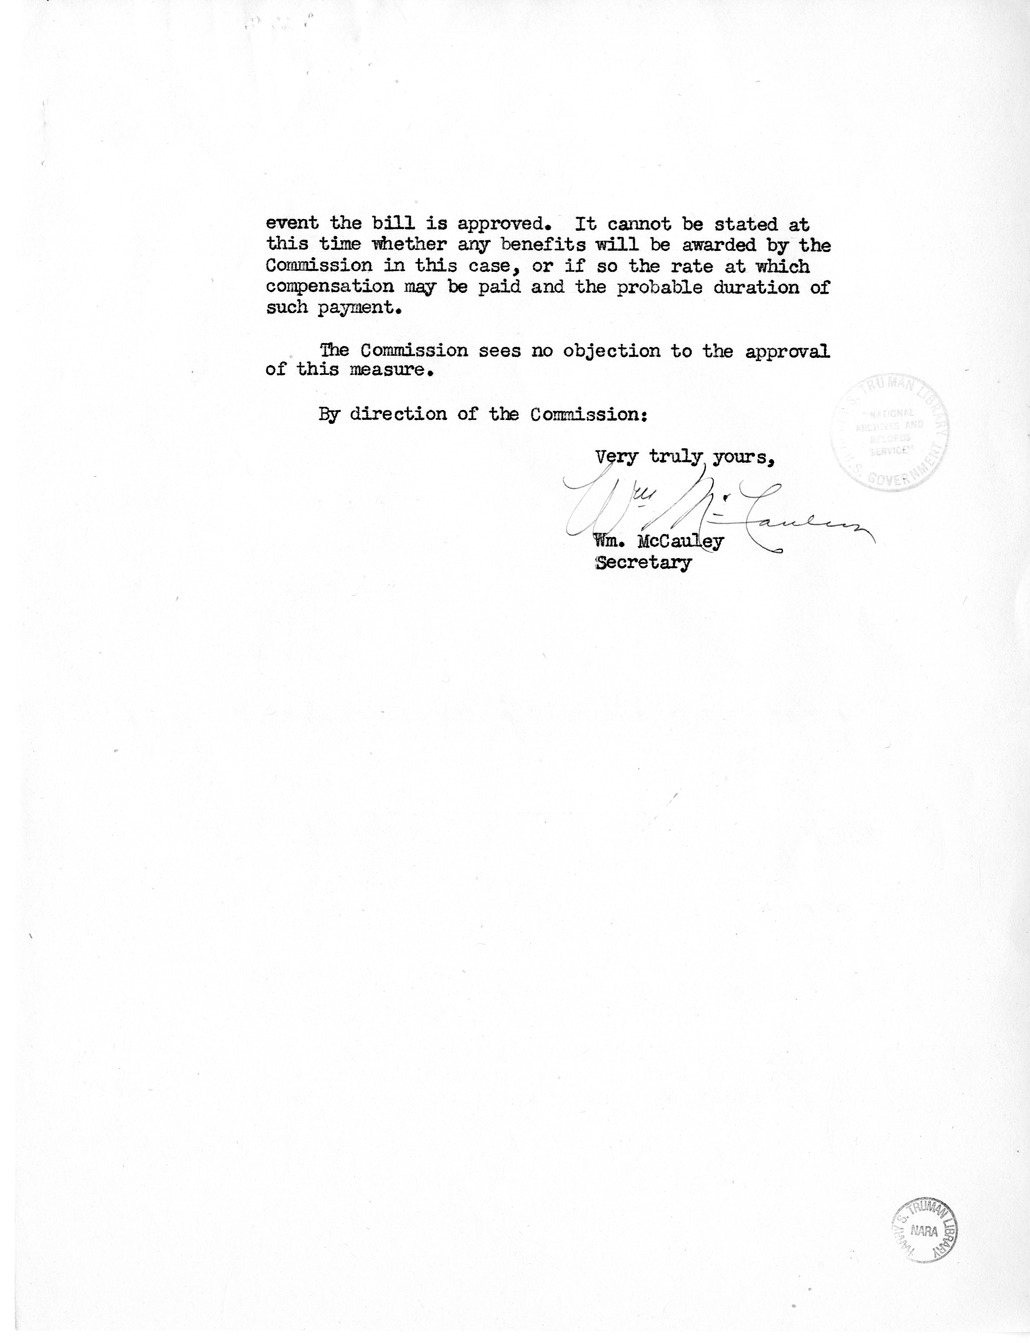 Memorandum from Frederick J. Bailey to M. C. Latta, H.R. 1079, For the Relief of Ray L. Smith, with Attachments